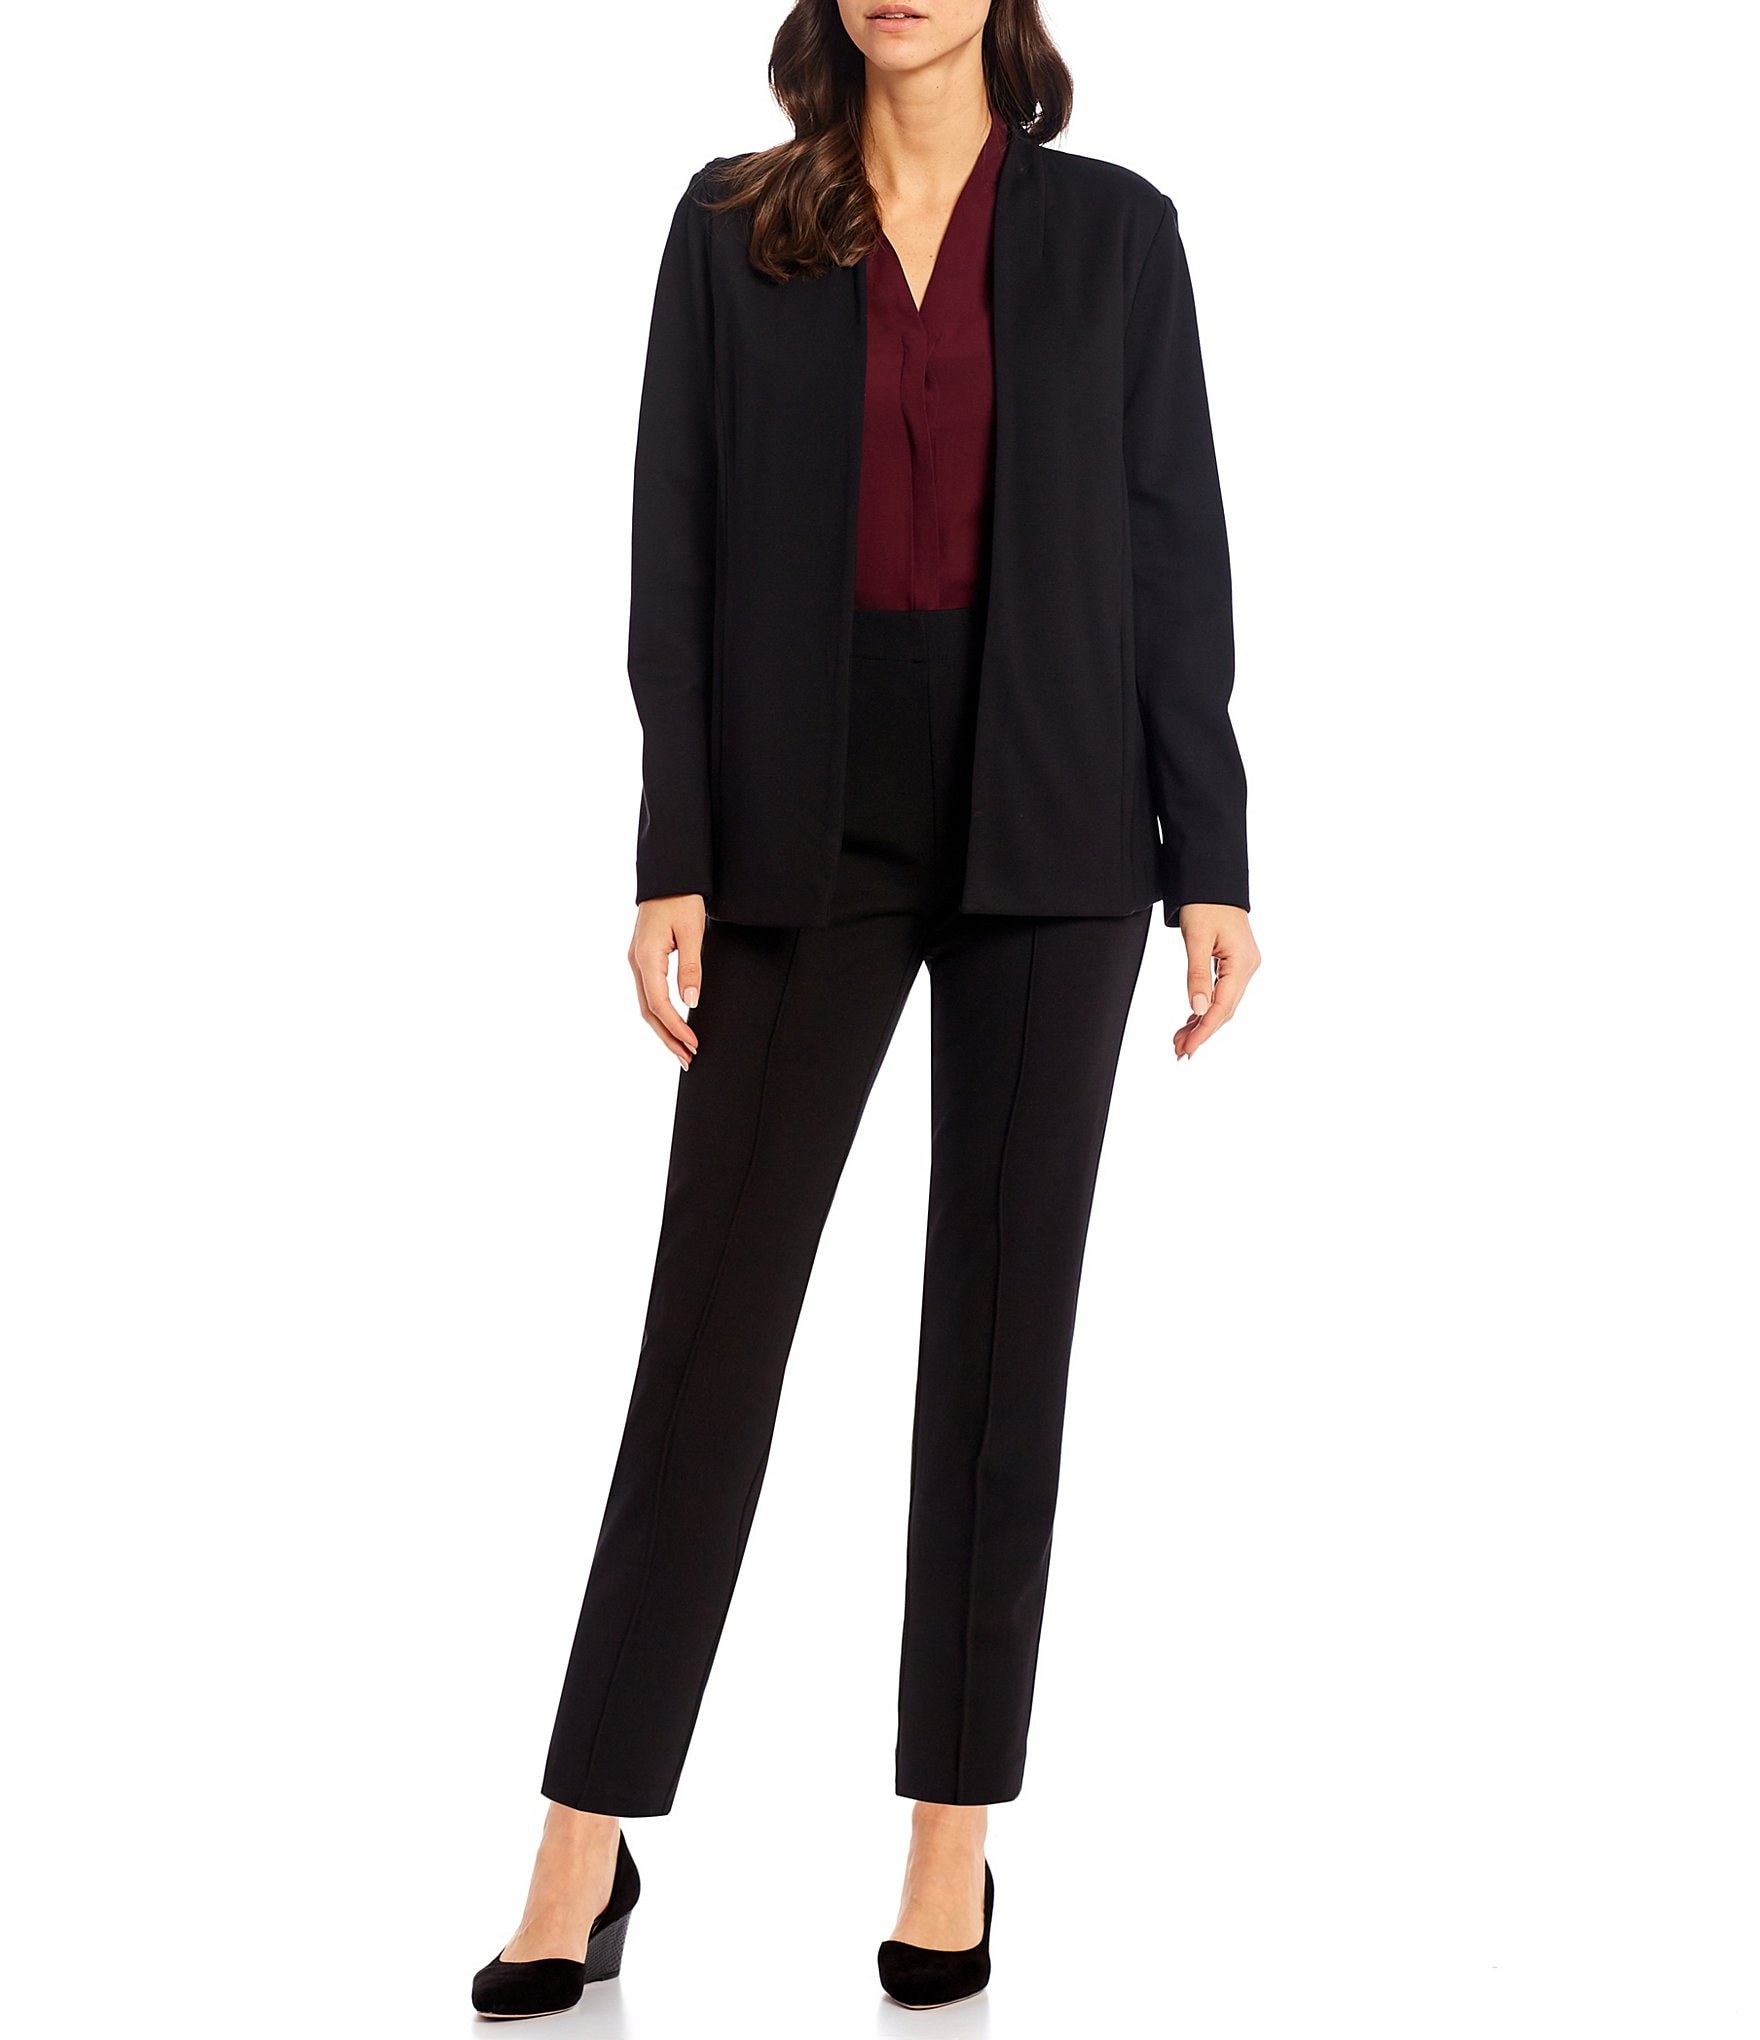 Long Sleeve Ladies Formal Shirt with Pants Women Blazer And Pants